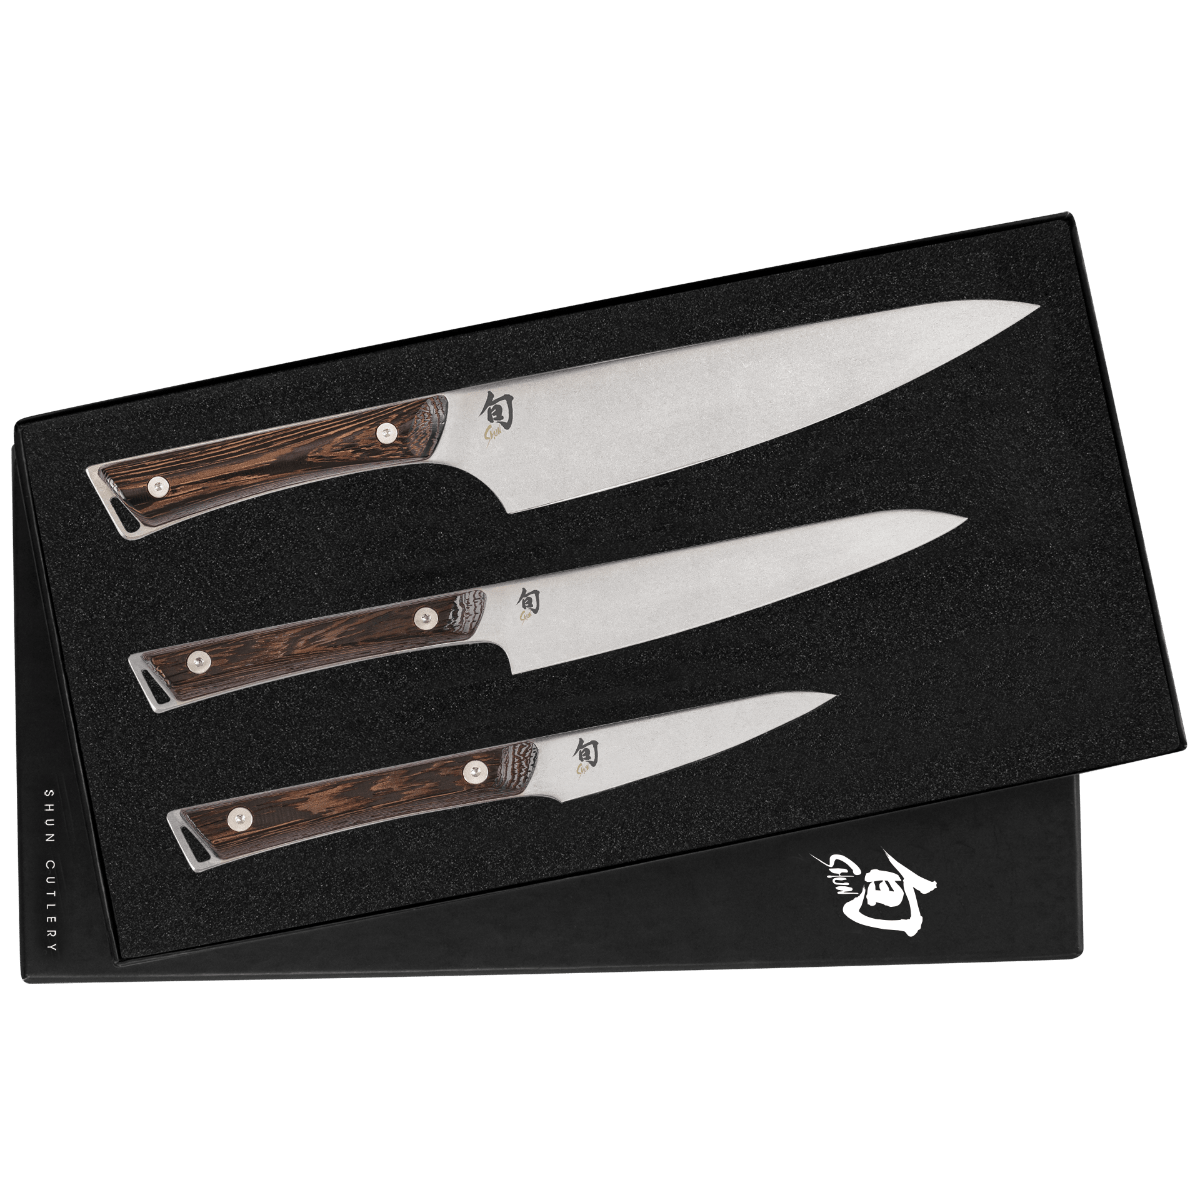 Shun Premier Grey Paring Knife - 4 – Cutlery and More